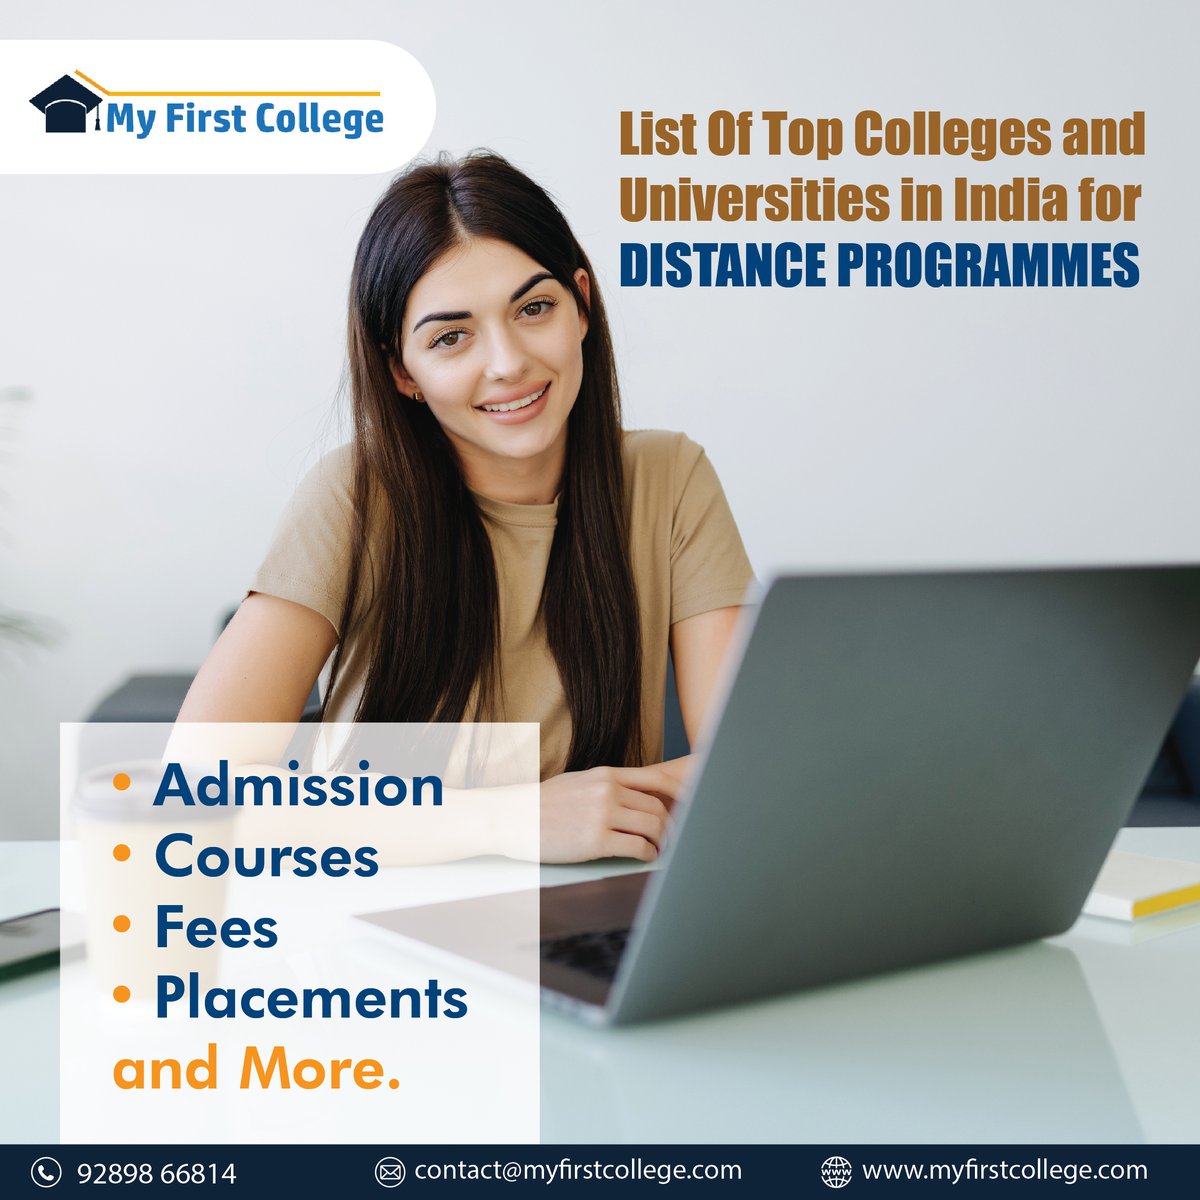 Looking for popular #distanceeducationcourses after 12th?  Get All Details About #DistanceCourses, Admission, syllabus, Eligibility, fees and more at #MyFirstCollege
.
#distancecourses #topdistancecoursesinindia #correspondenceprogrammes #education #college #Careers #university